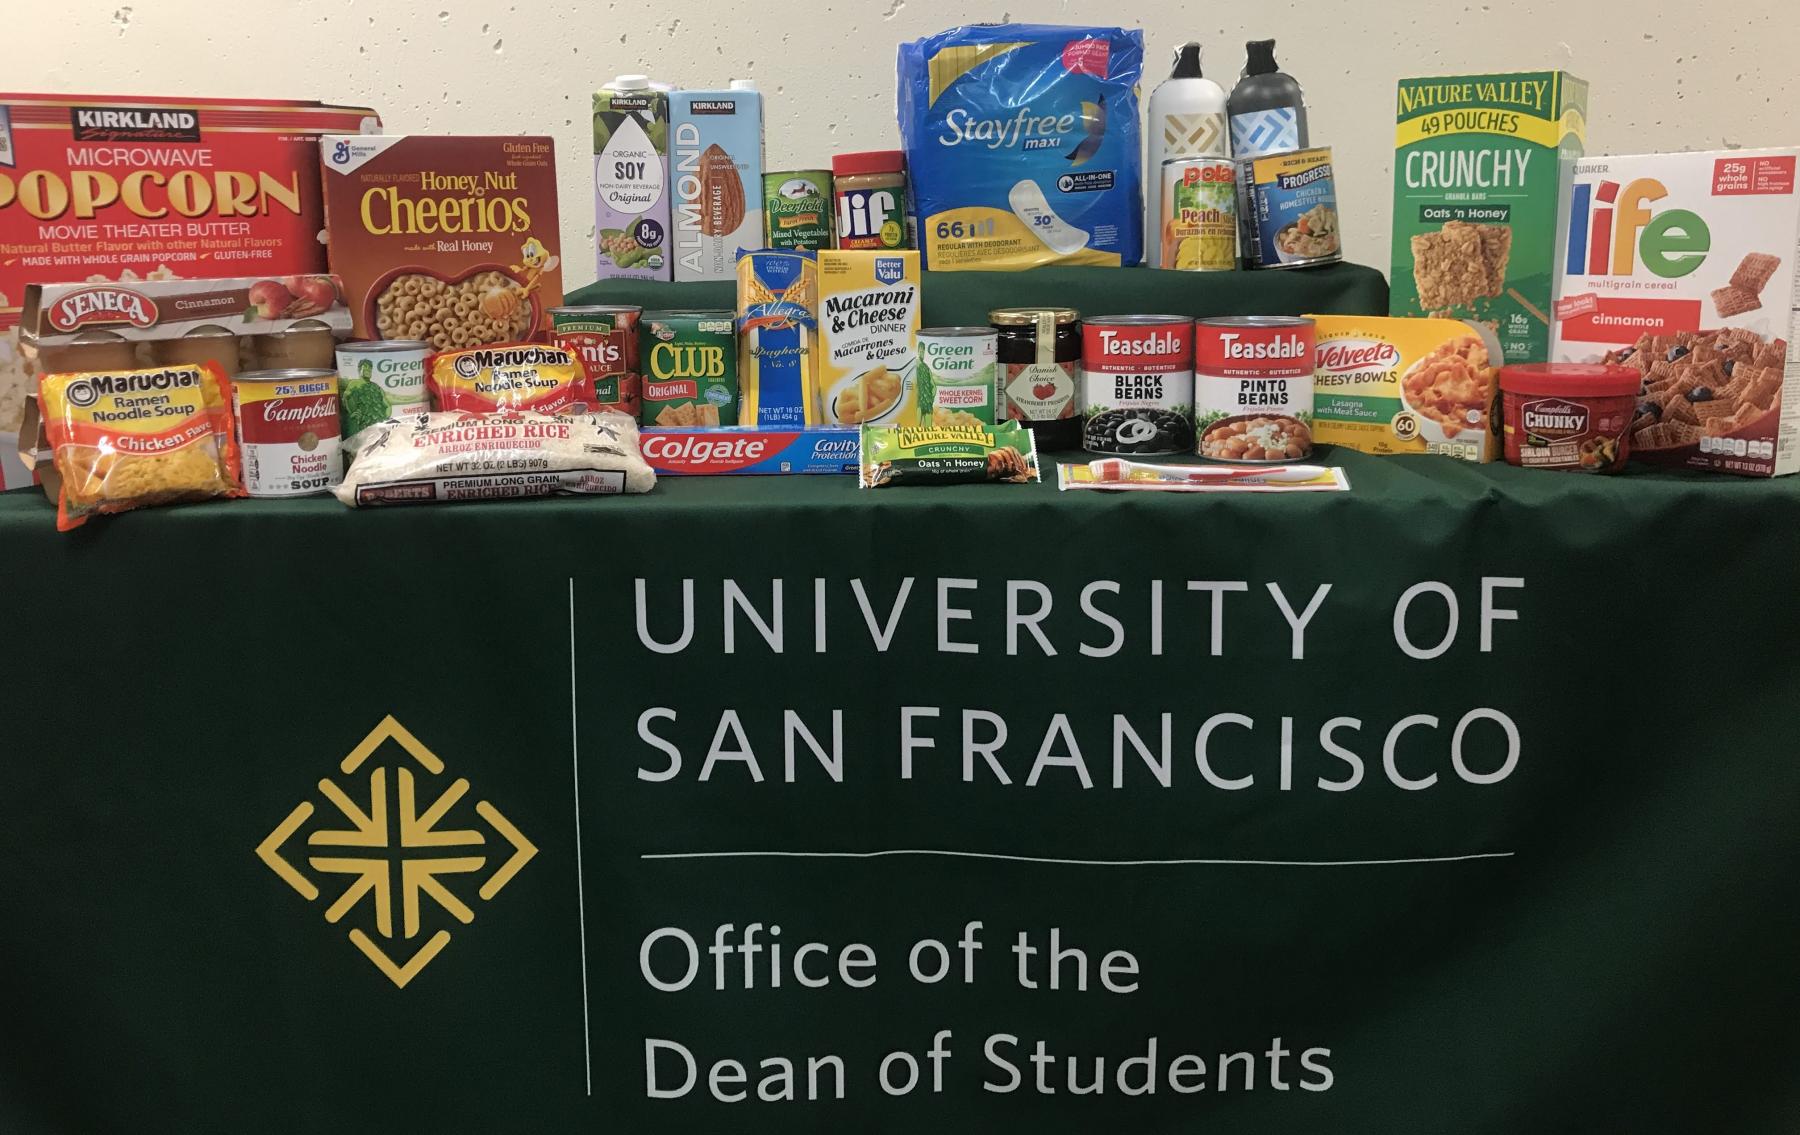 food items over the dean of students banner